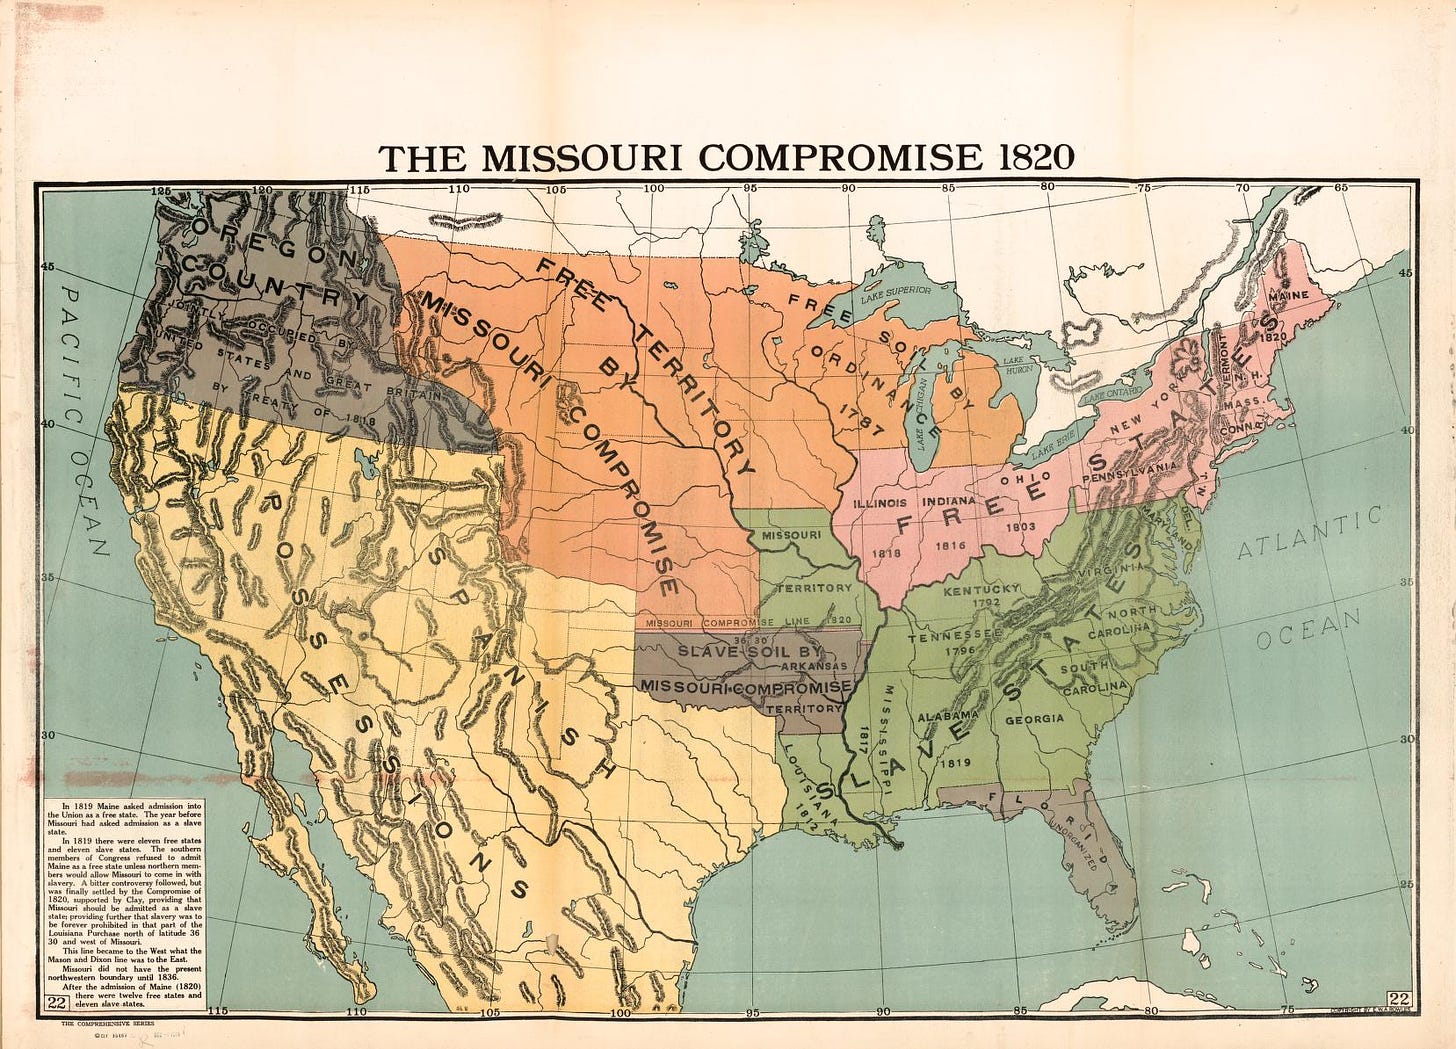 Modern School Supply Company, and E. W. A Rowles. The comprehensive series, historical-geographical maps of the United States. [Chicago, Ill.: Modern School Supply Co, 1919] Map. https://www.loc.gov/item/2009581137/.